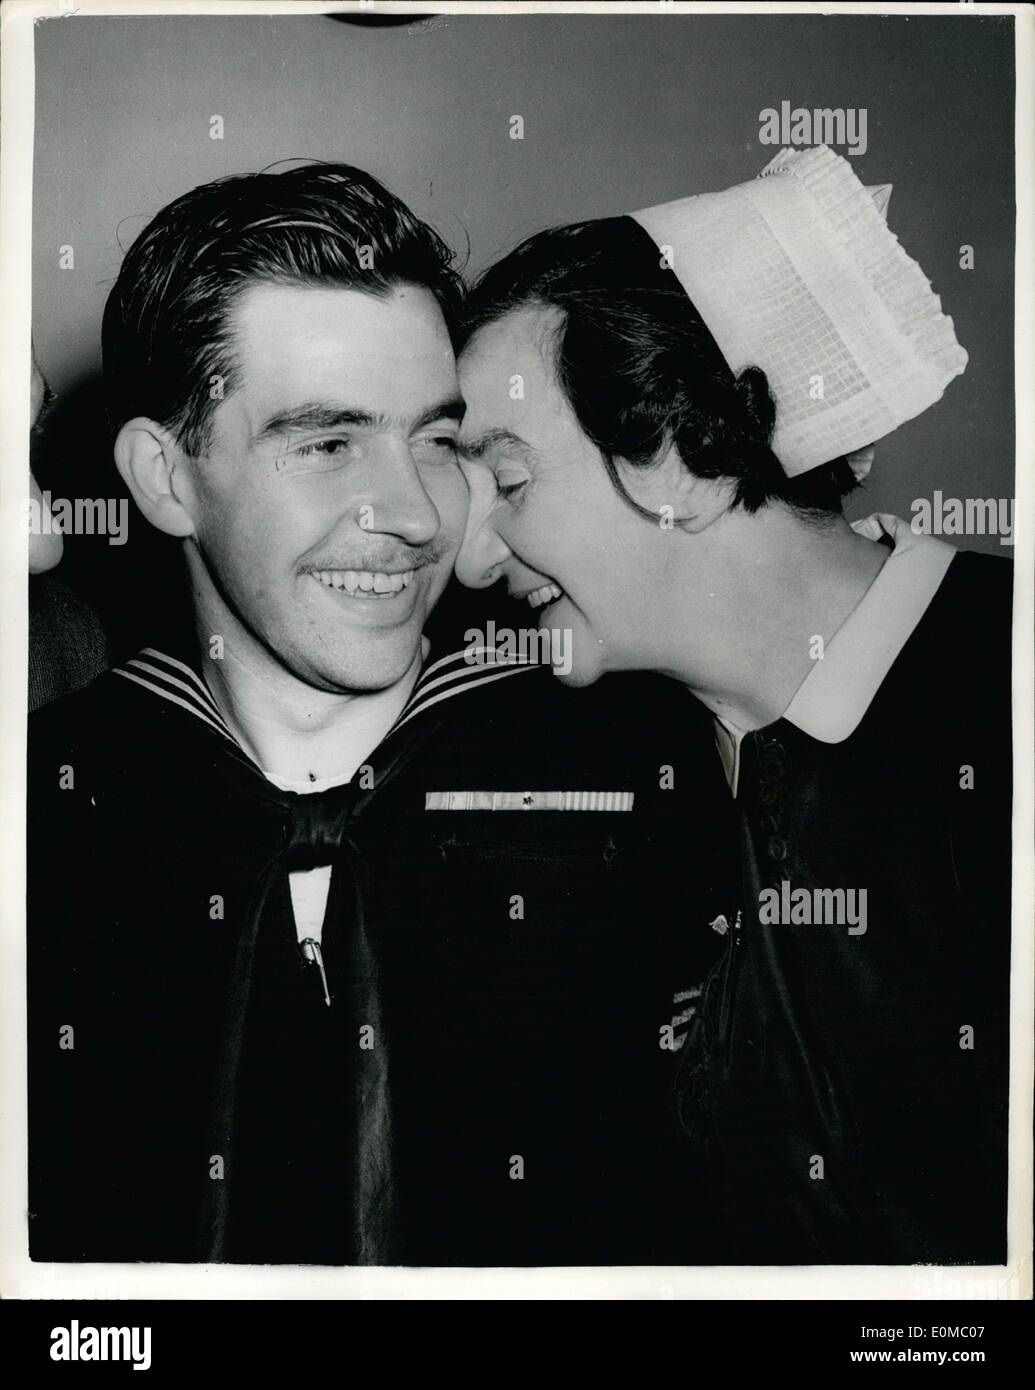 Jun. 06, 1954 - Mother's Kiss For Hero. A kiss from his mother greeted Bosun's Mate, George Banks, 22 year old hero of the recent explosion and fire aboard the U.S. aircraft carrier Bennington, when he landed at Prestwick Airport yesterday for 20 days leave. George was badly burned when he stayed behind in the carrier's pump room to drain fuel onto protected tanks, saving the ship, in which 99 sailors died, and her 2,000 crew from even greater disaster. He joined the U.S. Navy when he emigrated to American two years ago Stock Photo